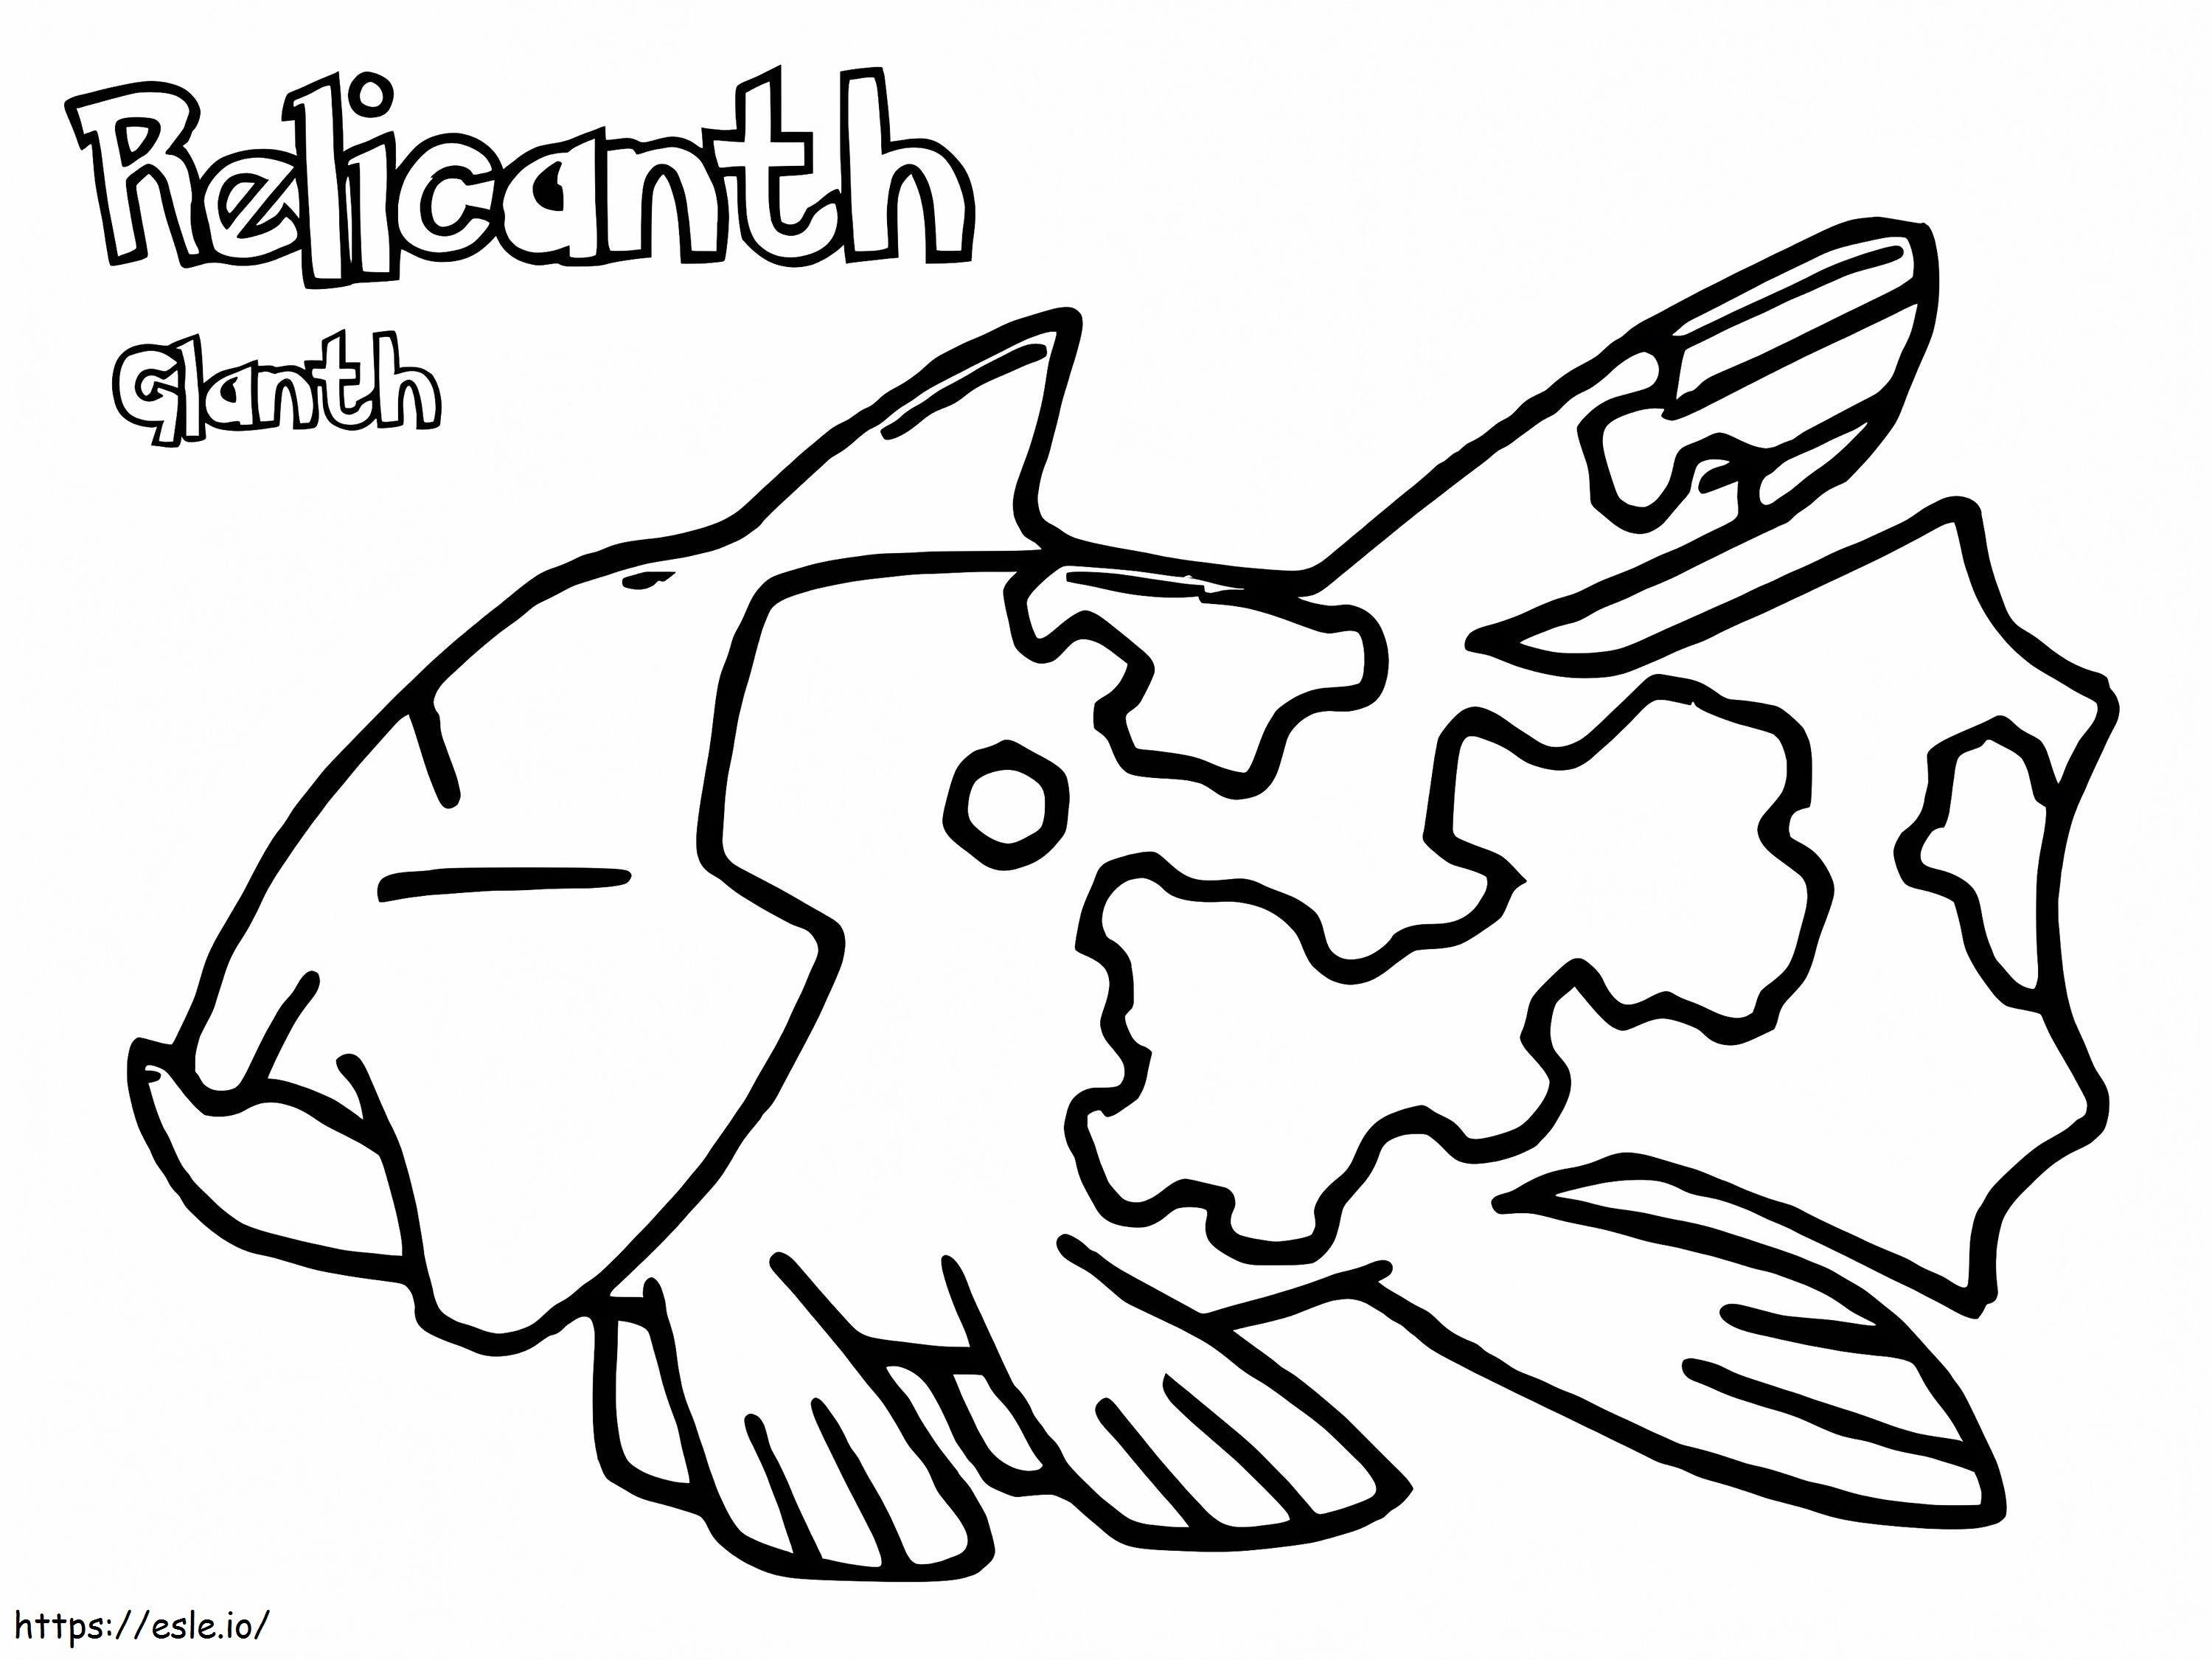 Free Relicanth Pokemon coloring page